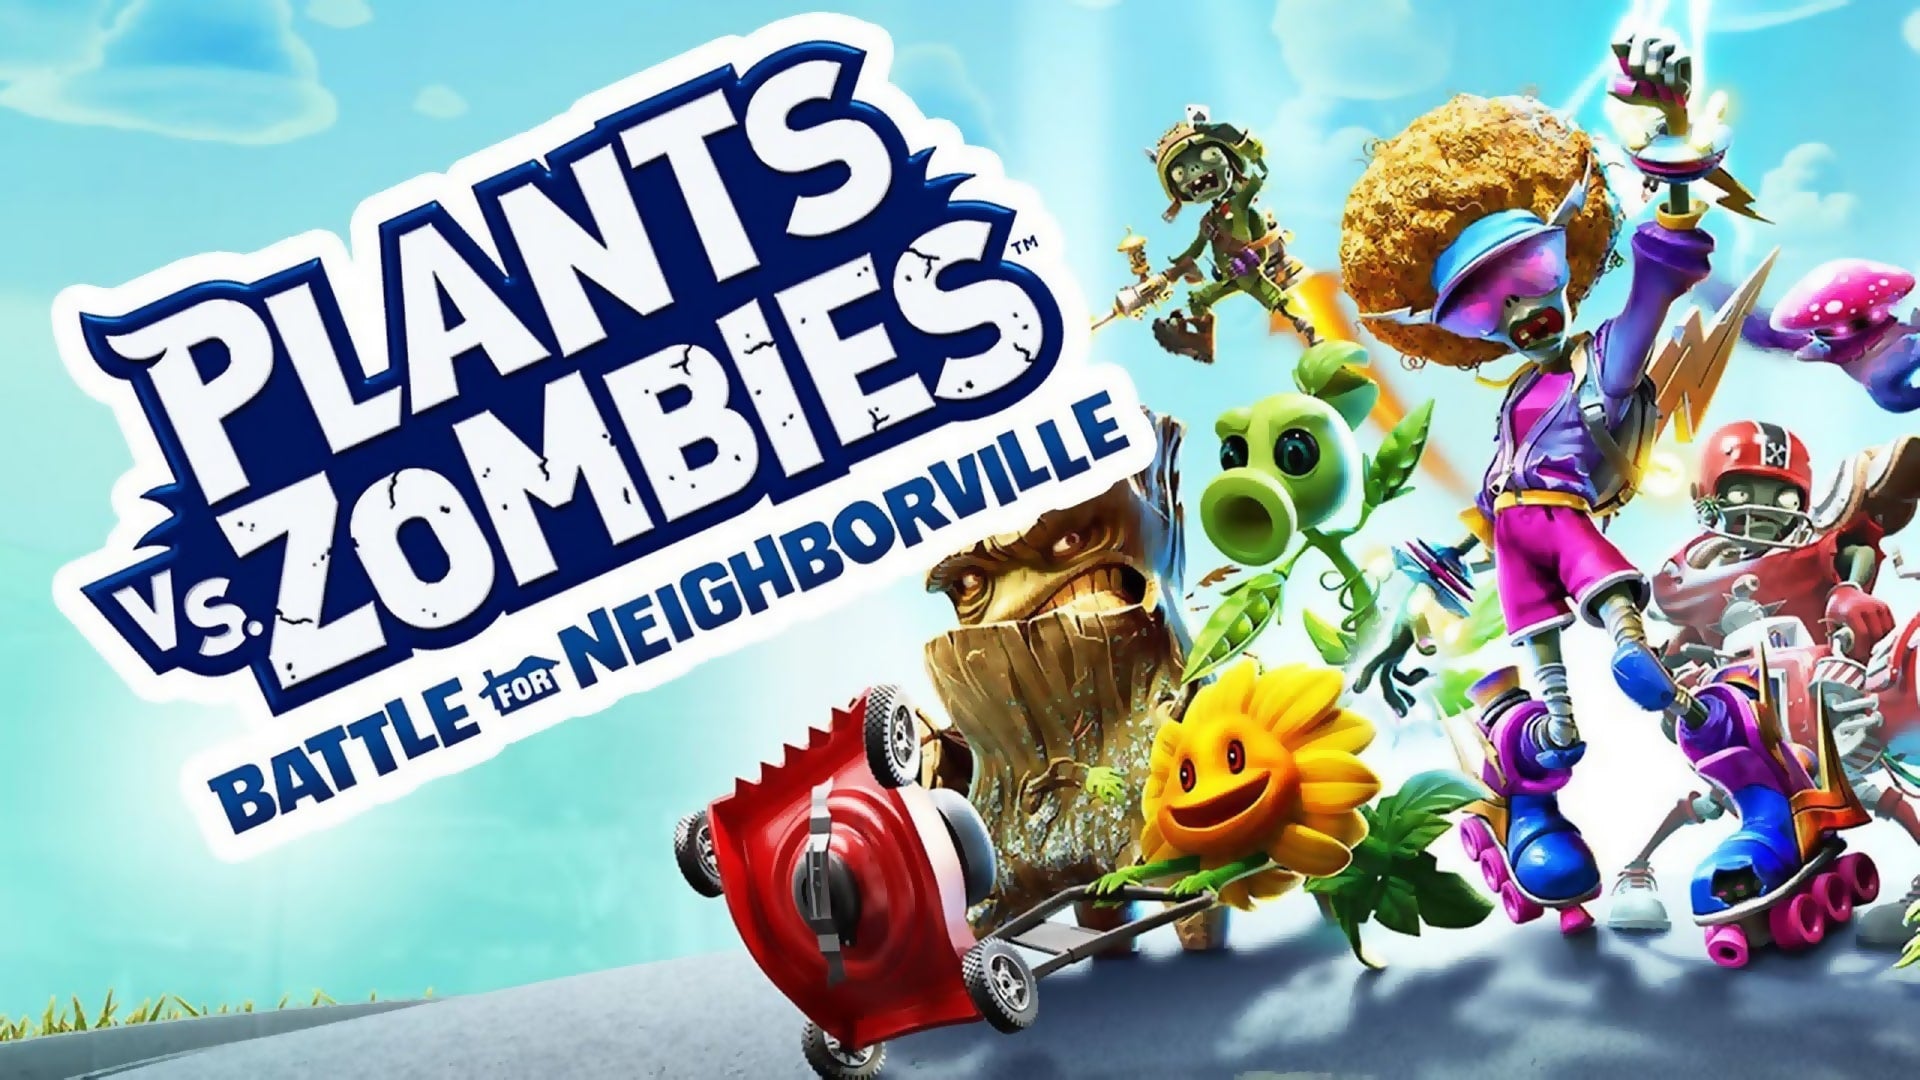 Plants vs Zombies 2: It's About Time Archives — GAMINGTREND